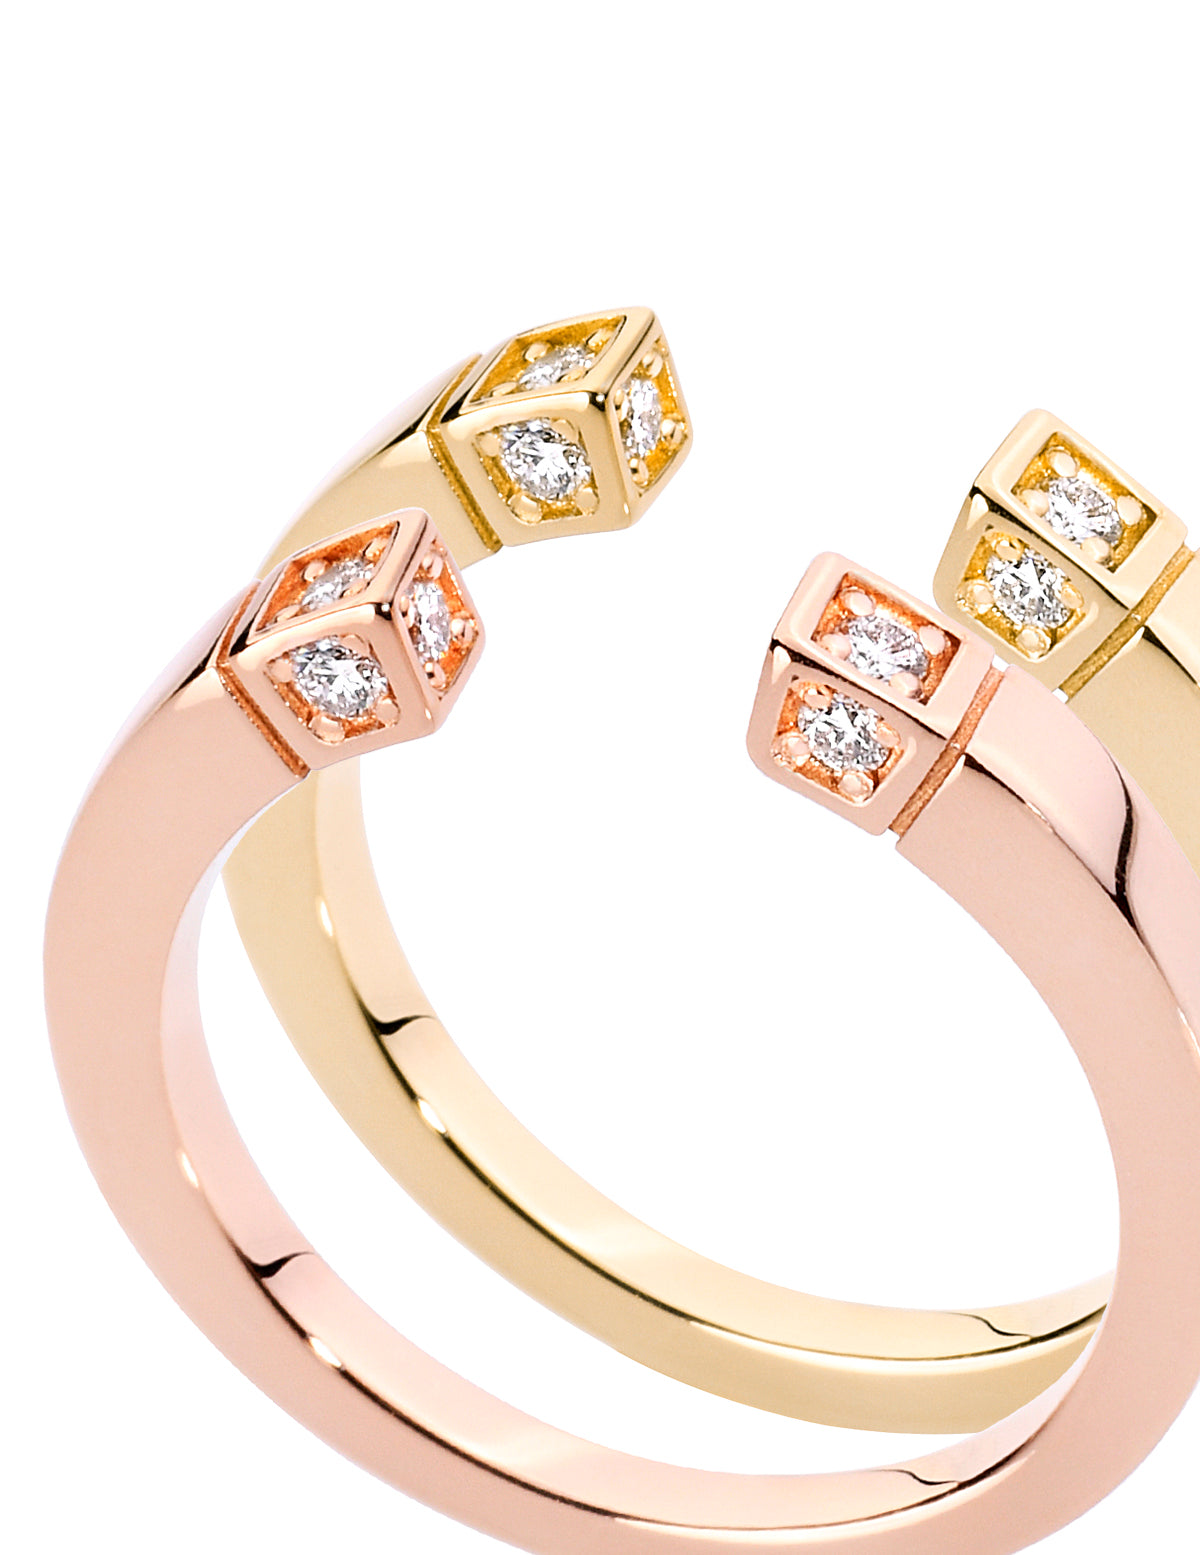 Difference between Rose Gold and Yellow Gold